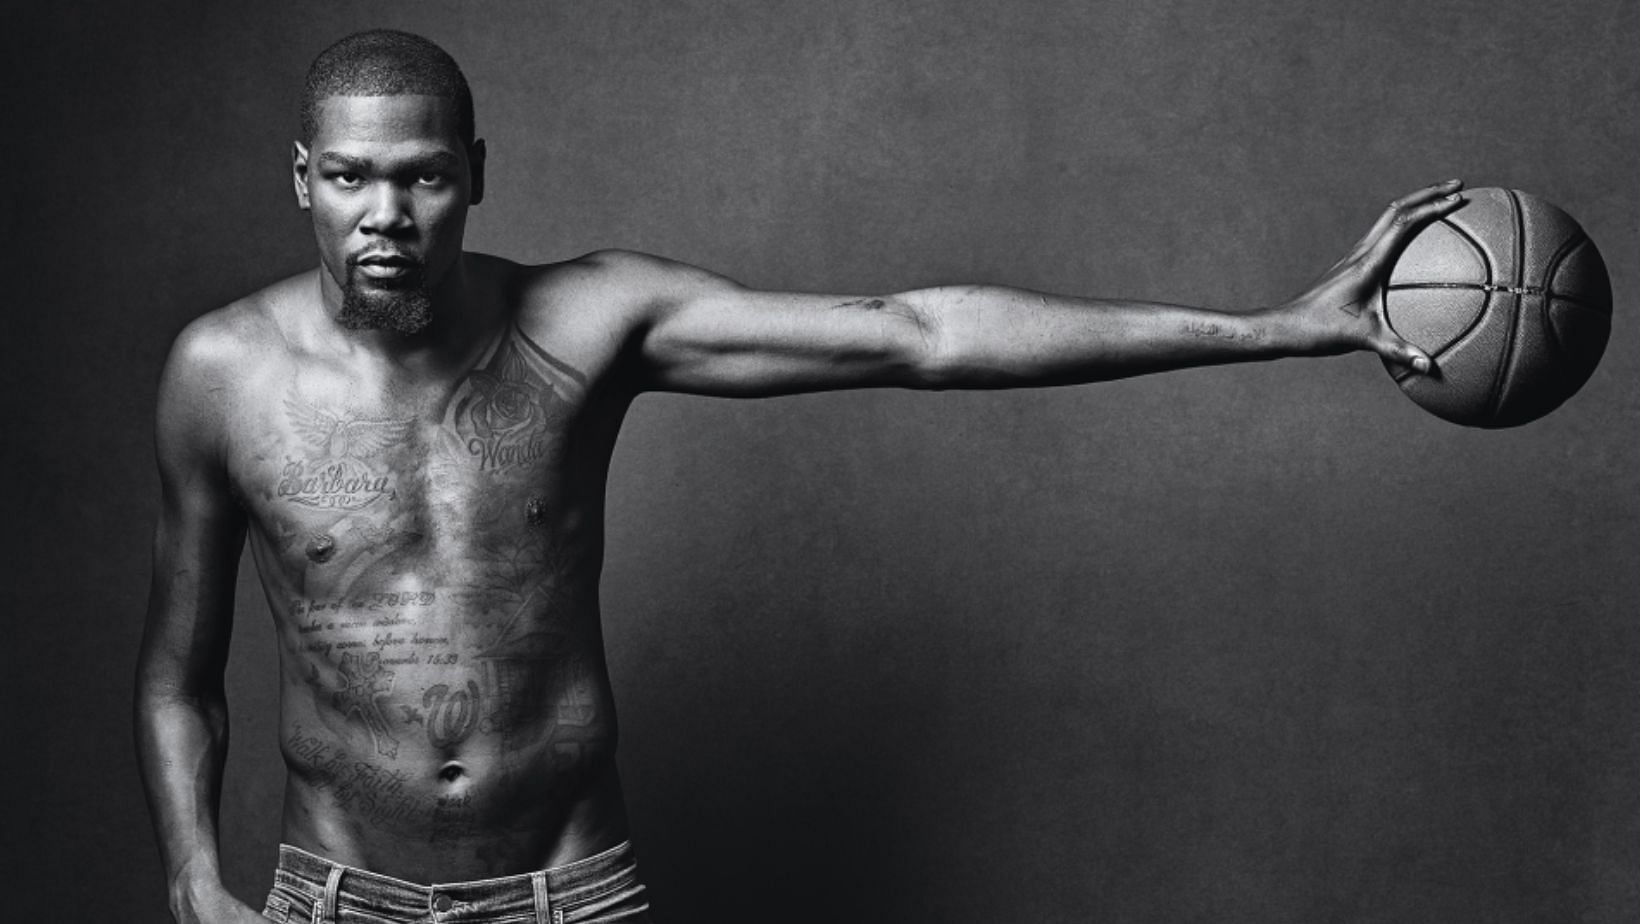 Kevin Durant shuts down any potential documentary films about him.